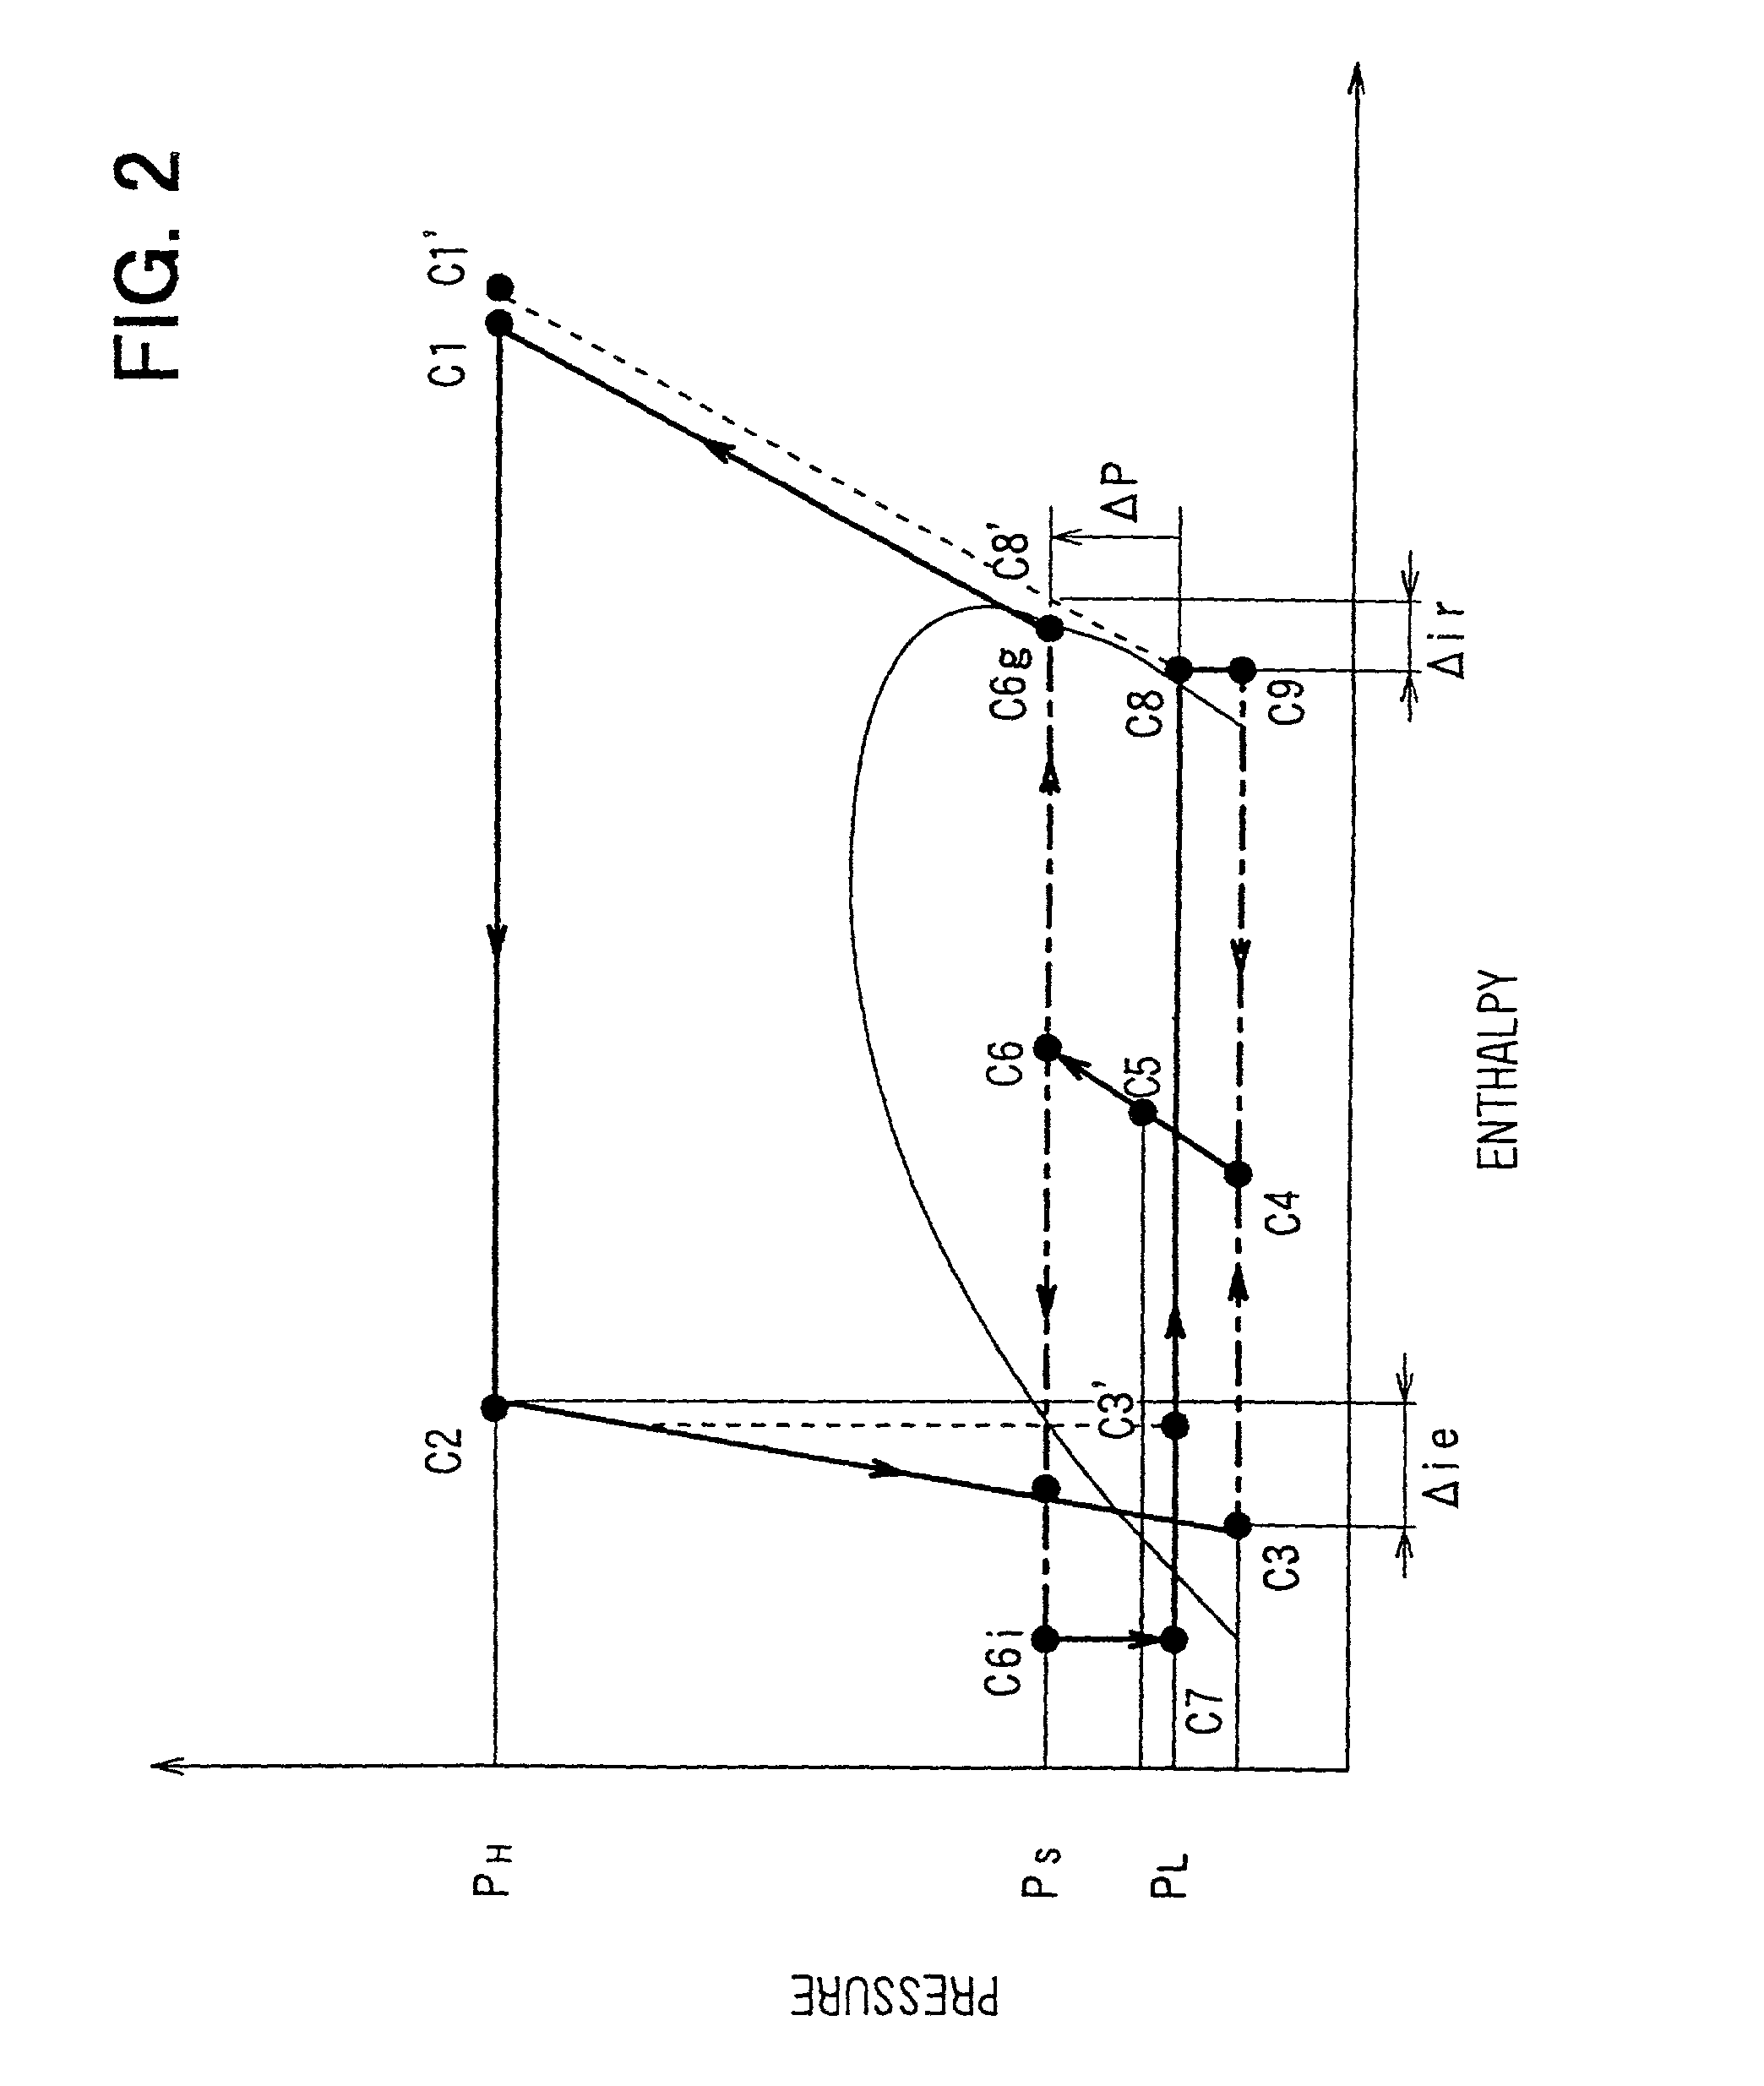 Ejector cycle system with critical refrigerant pressure